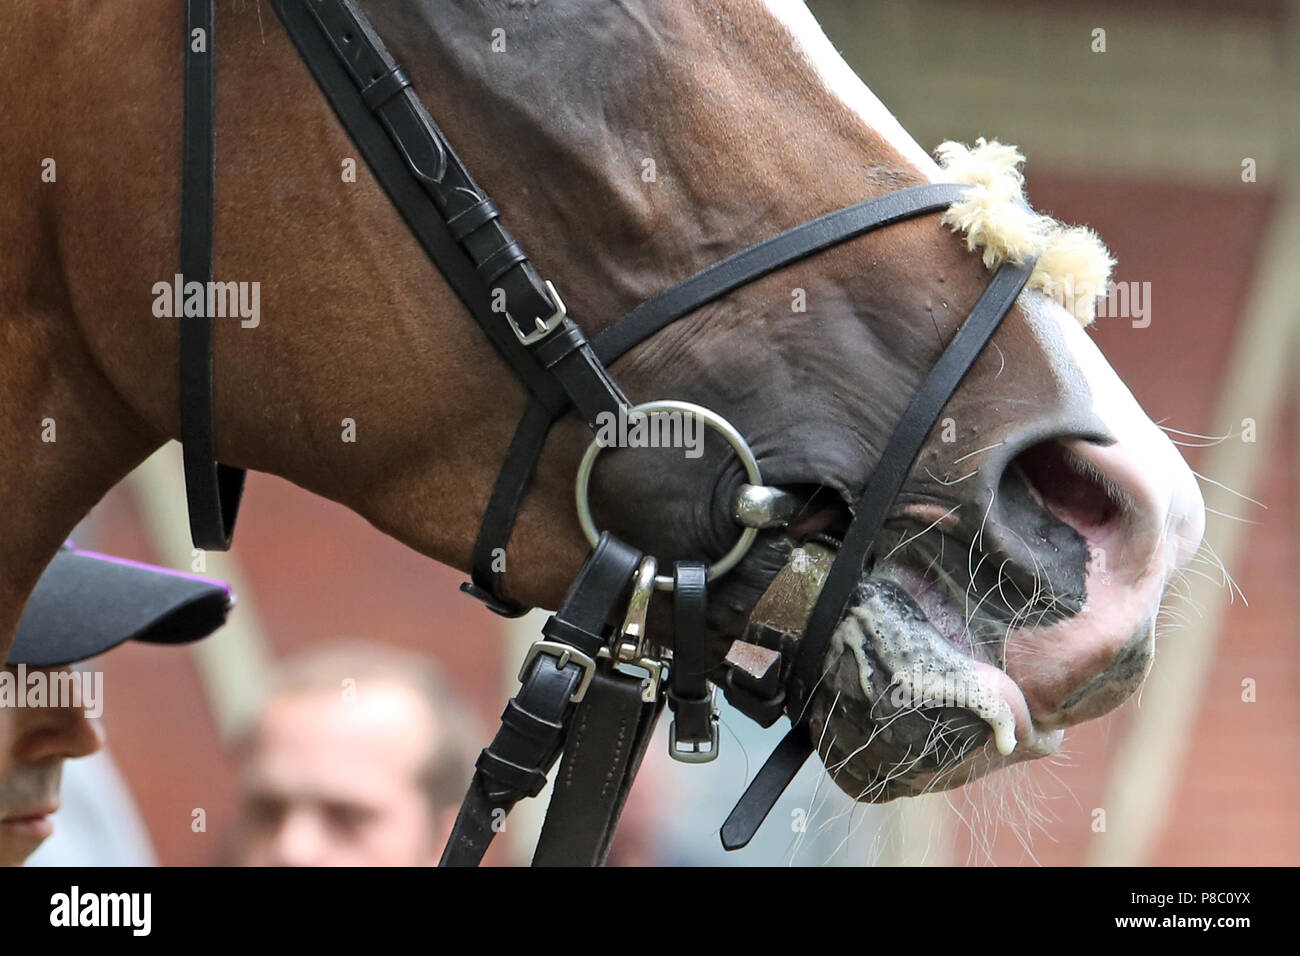 Dresden, detail, horse with tailed tongue and locking strap Stock Photo